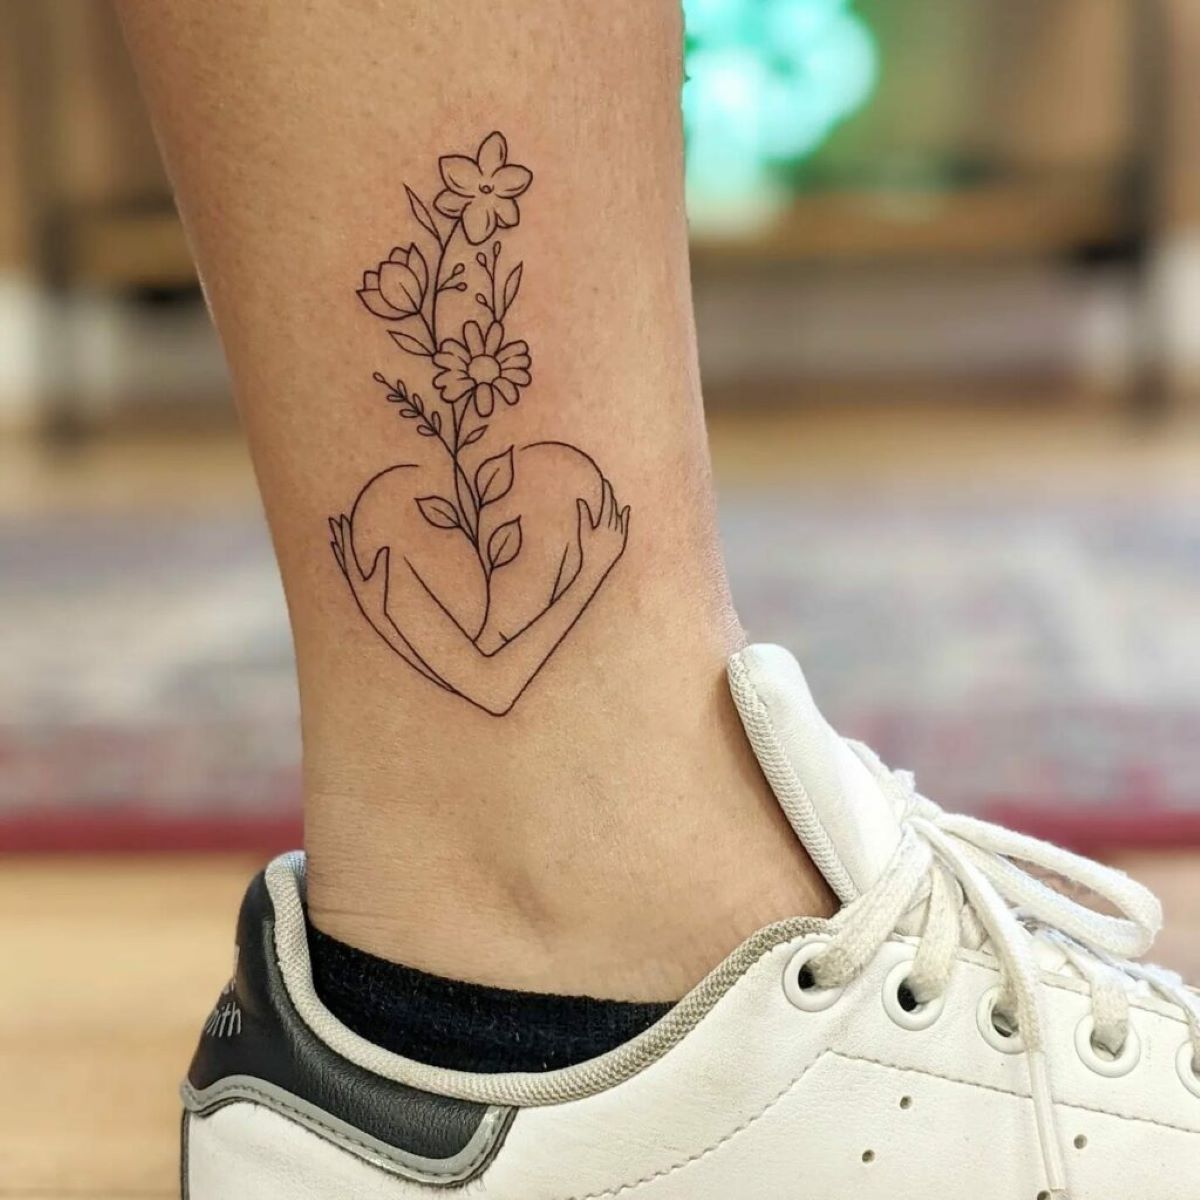 The Perfect Symbol Tattoo For Self-Love And Self-Respect!